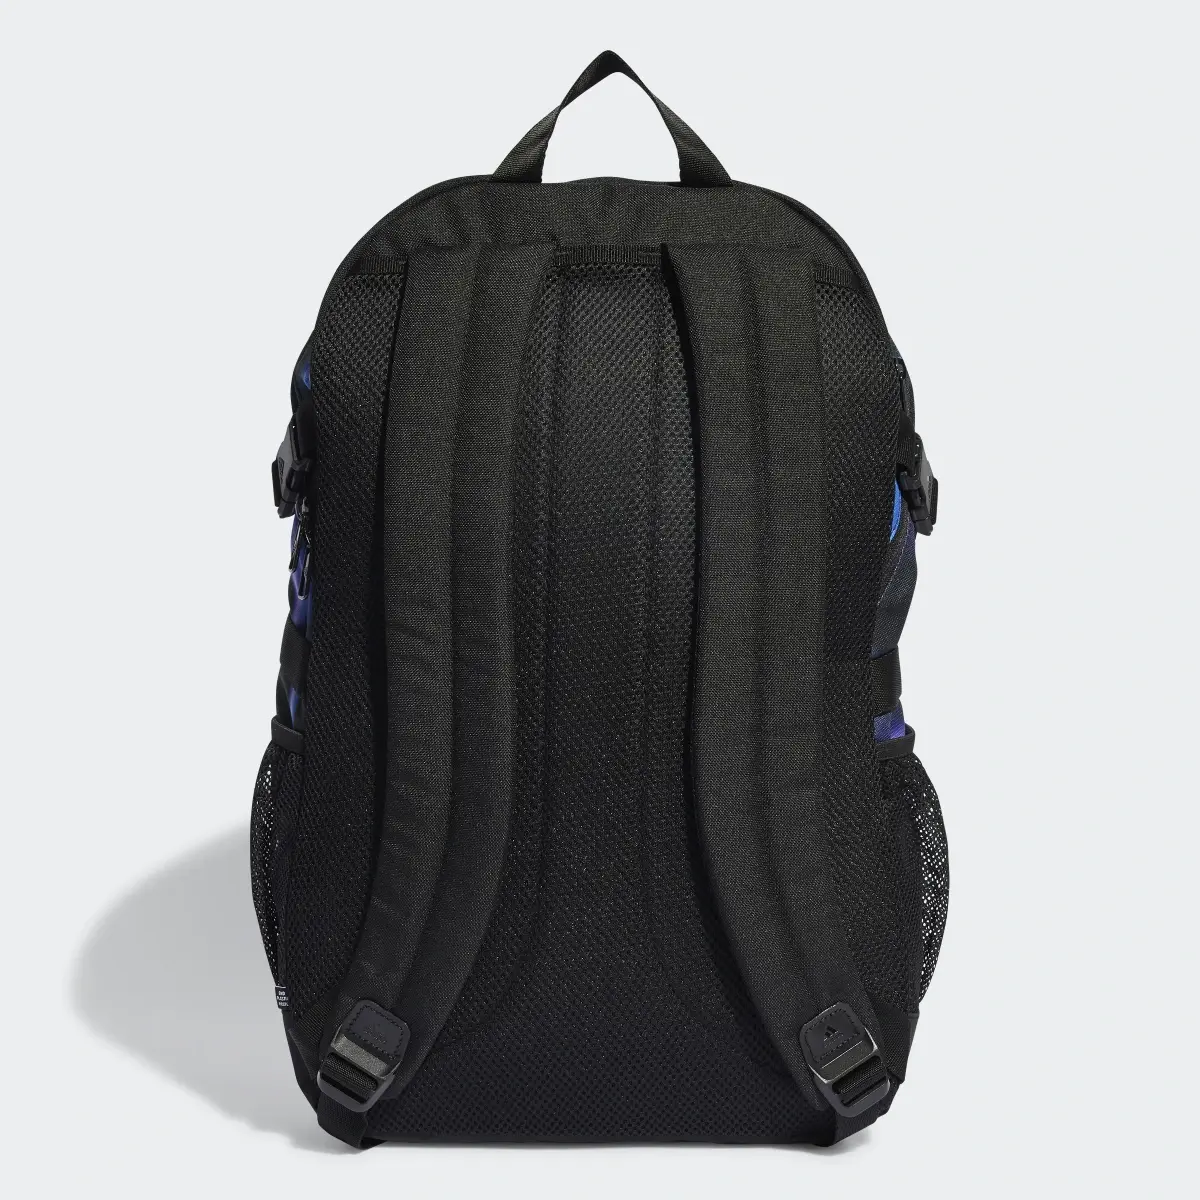 Adidas Power VI Graphic Backpack. 3